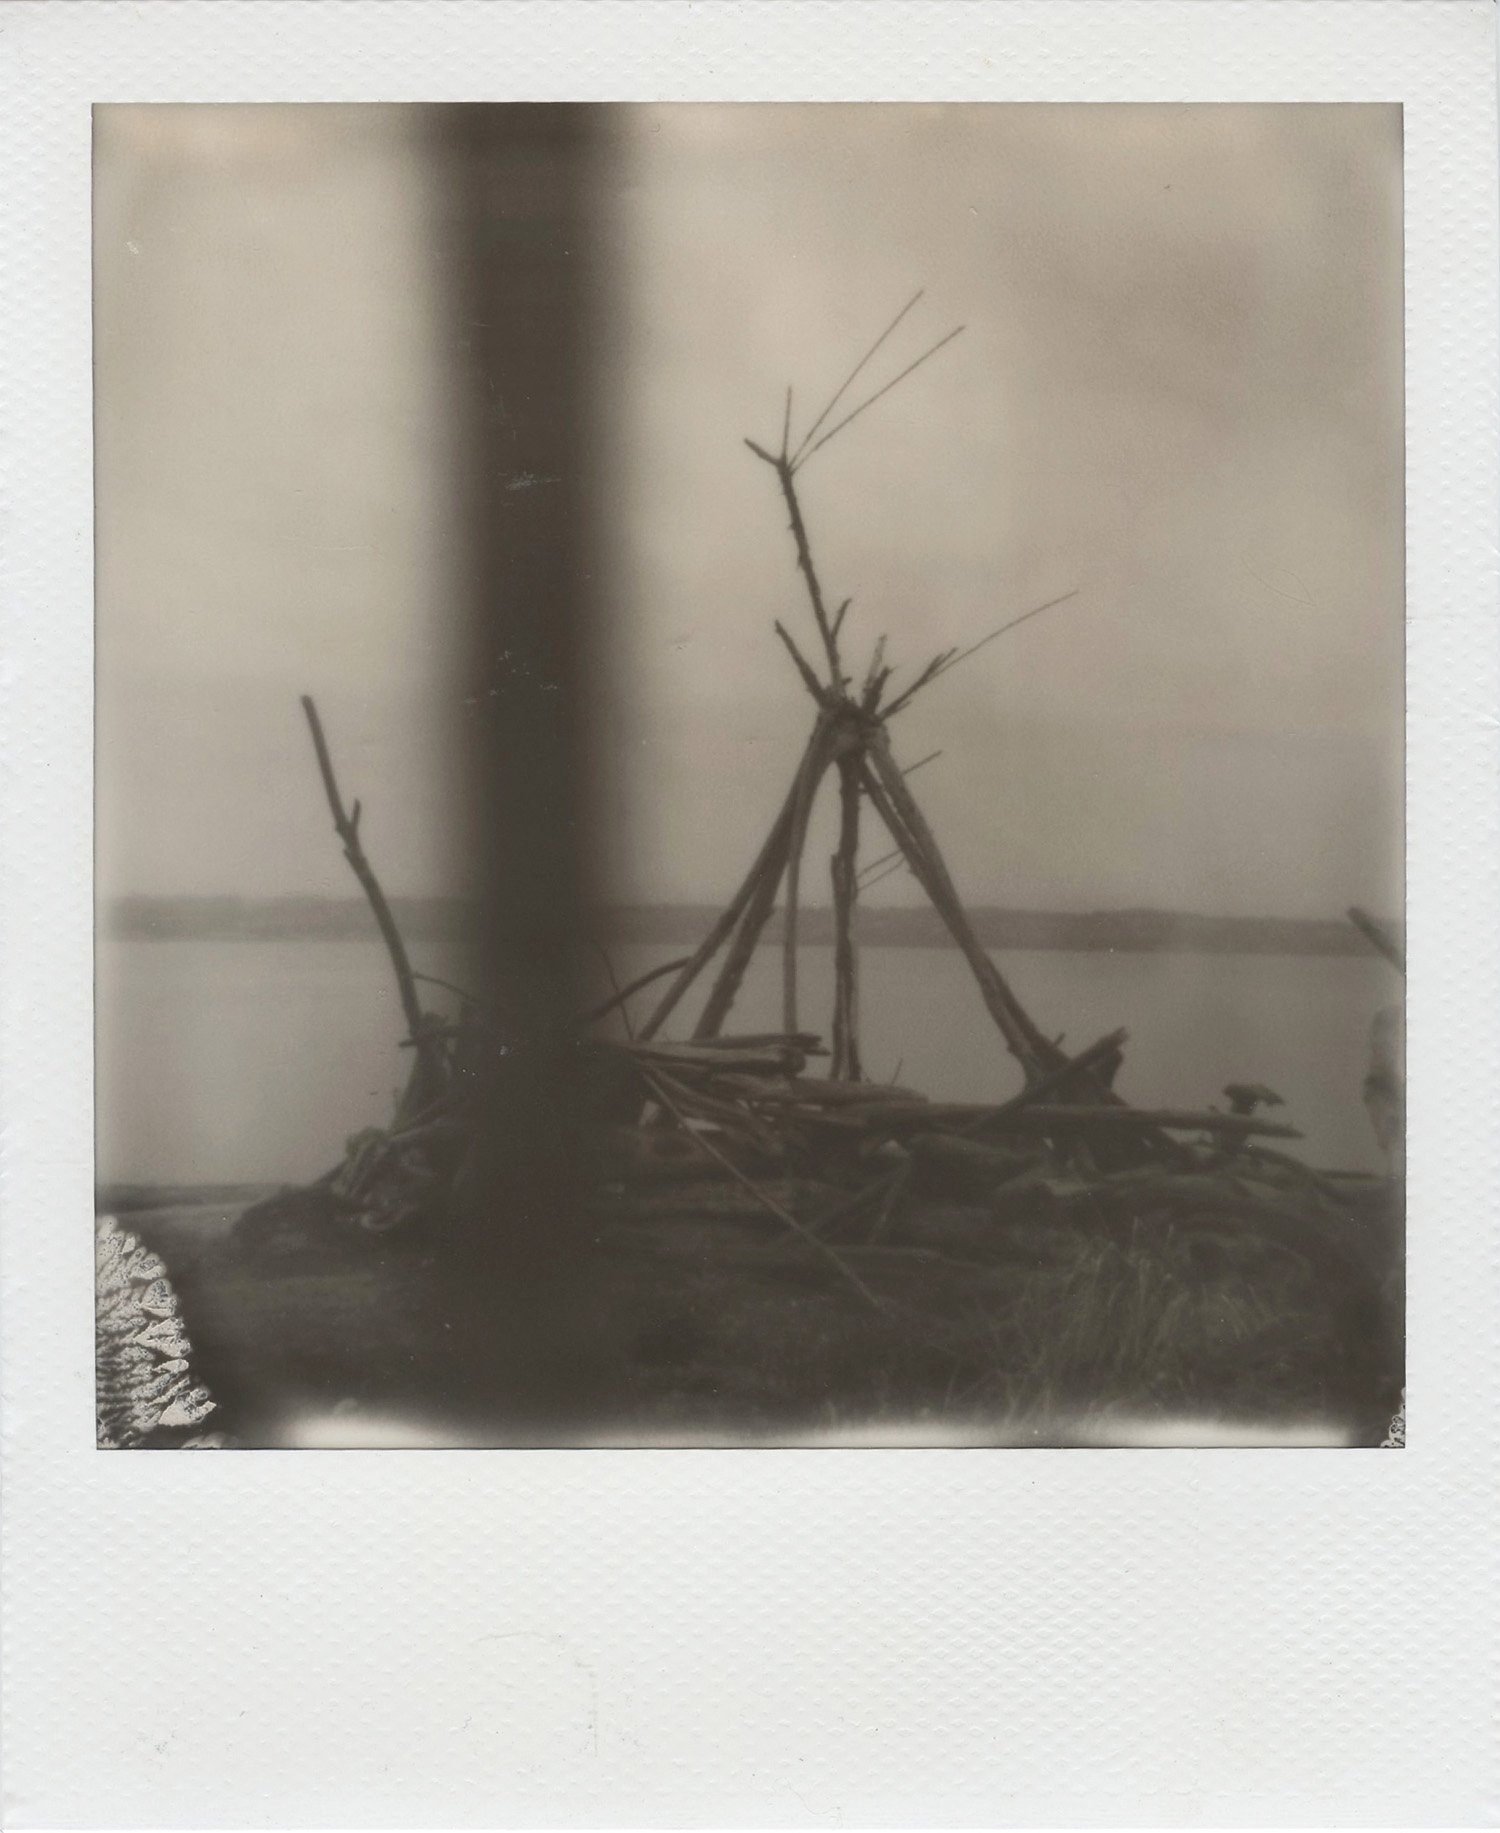  Impossible Project, 2016 